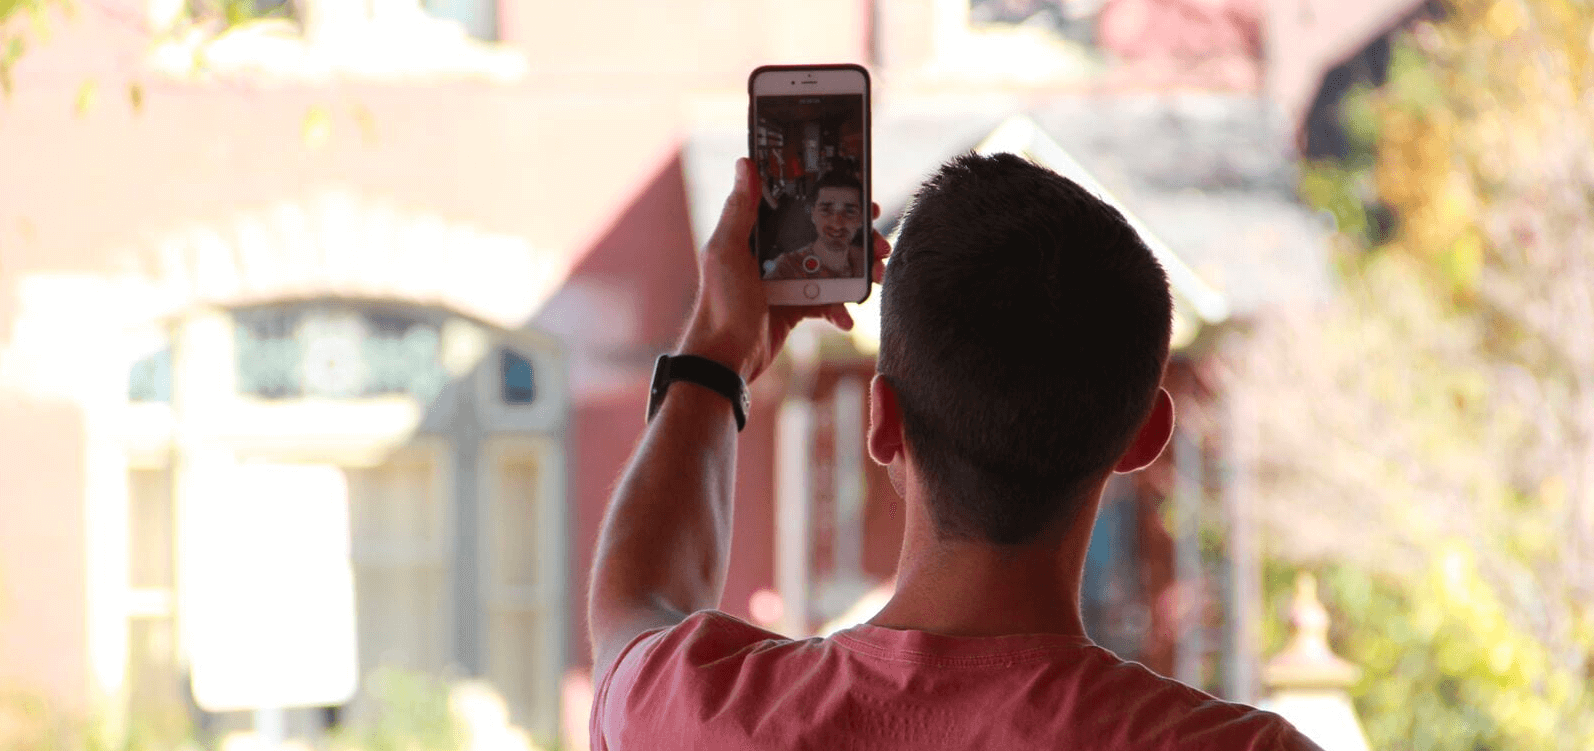 How to Master Vertical Video and Stories: Introducing Our New Email Series